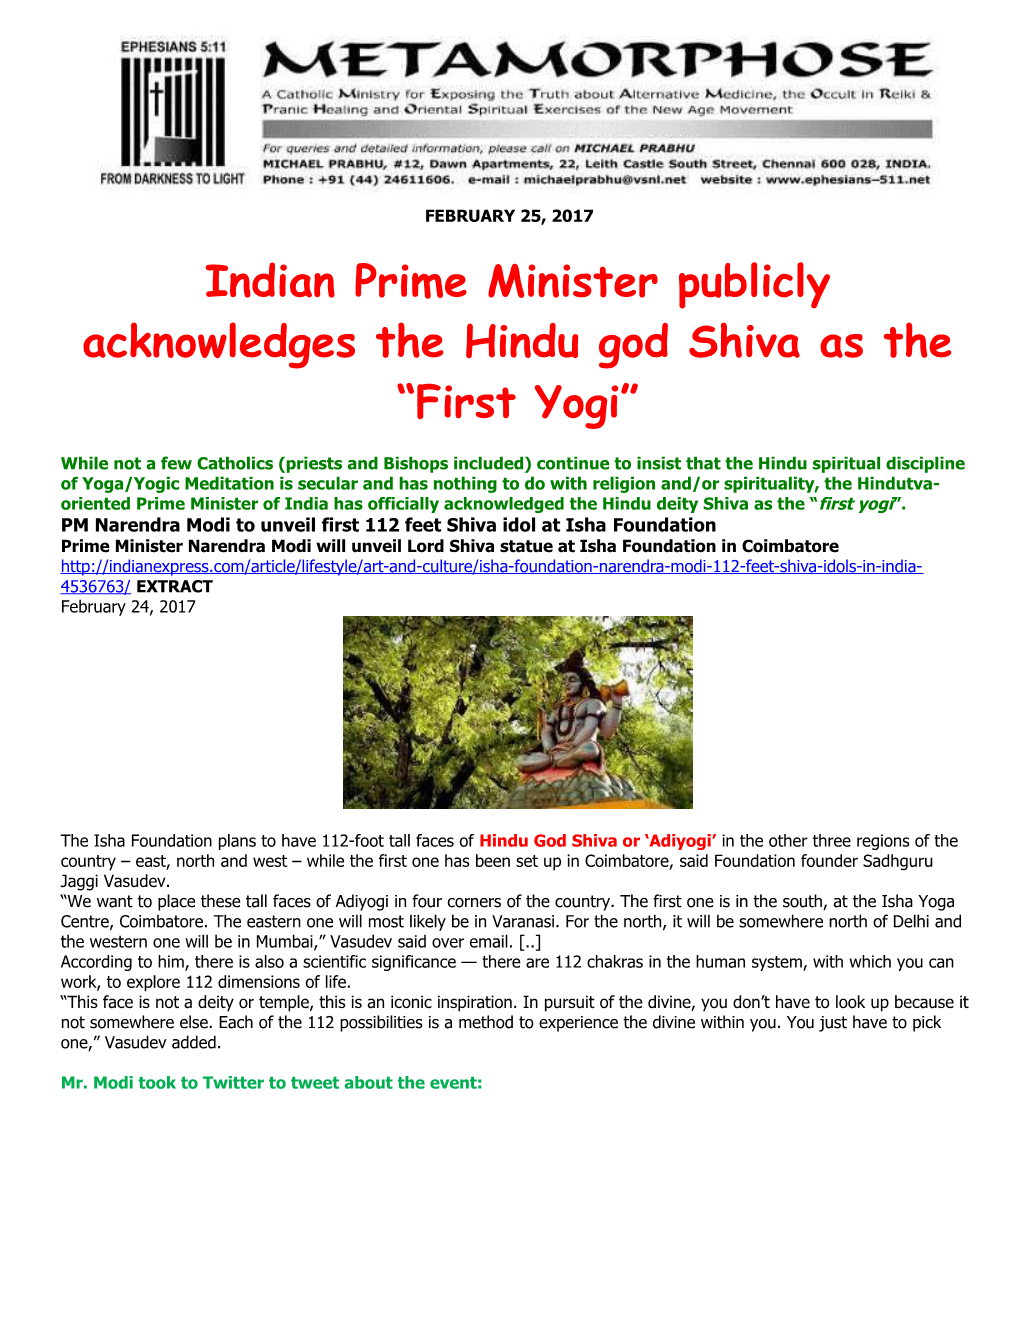 Indian Prime Minister Publicly Acknowledges the Hindu God Shiva As the First Yogi